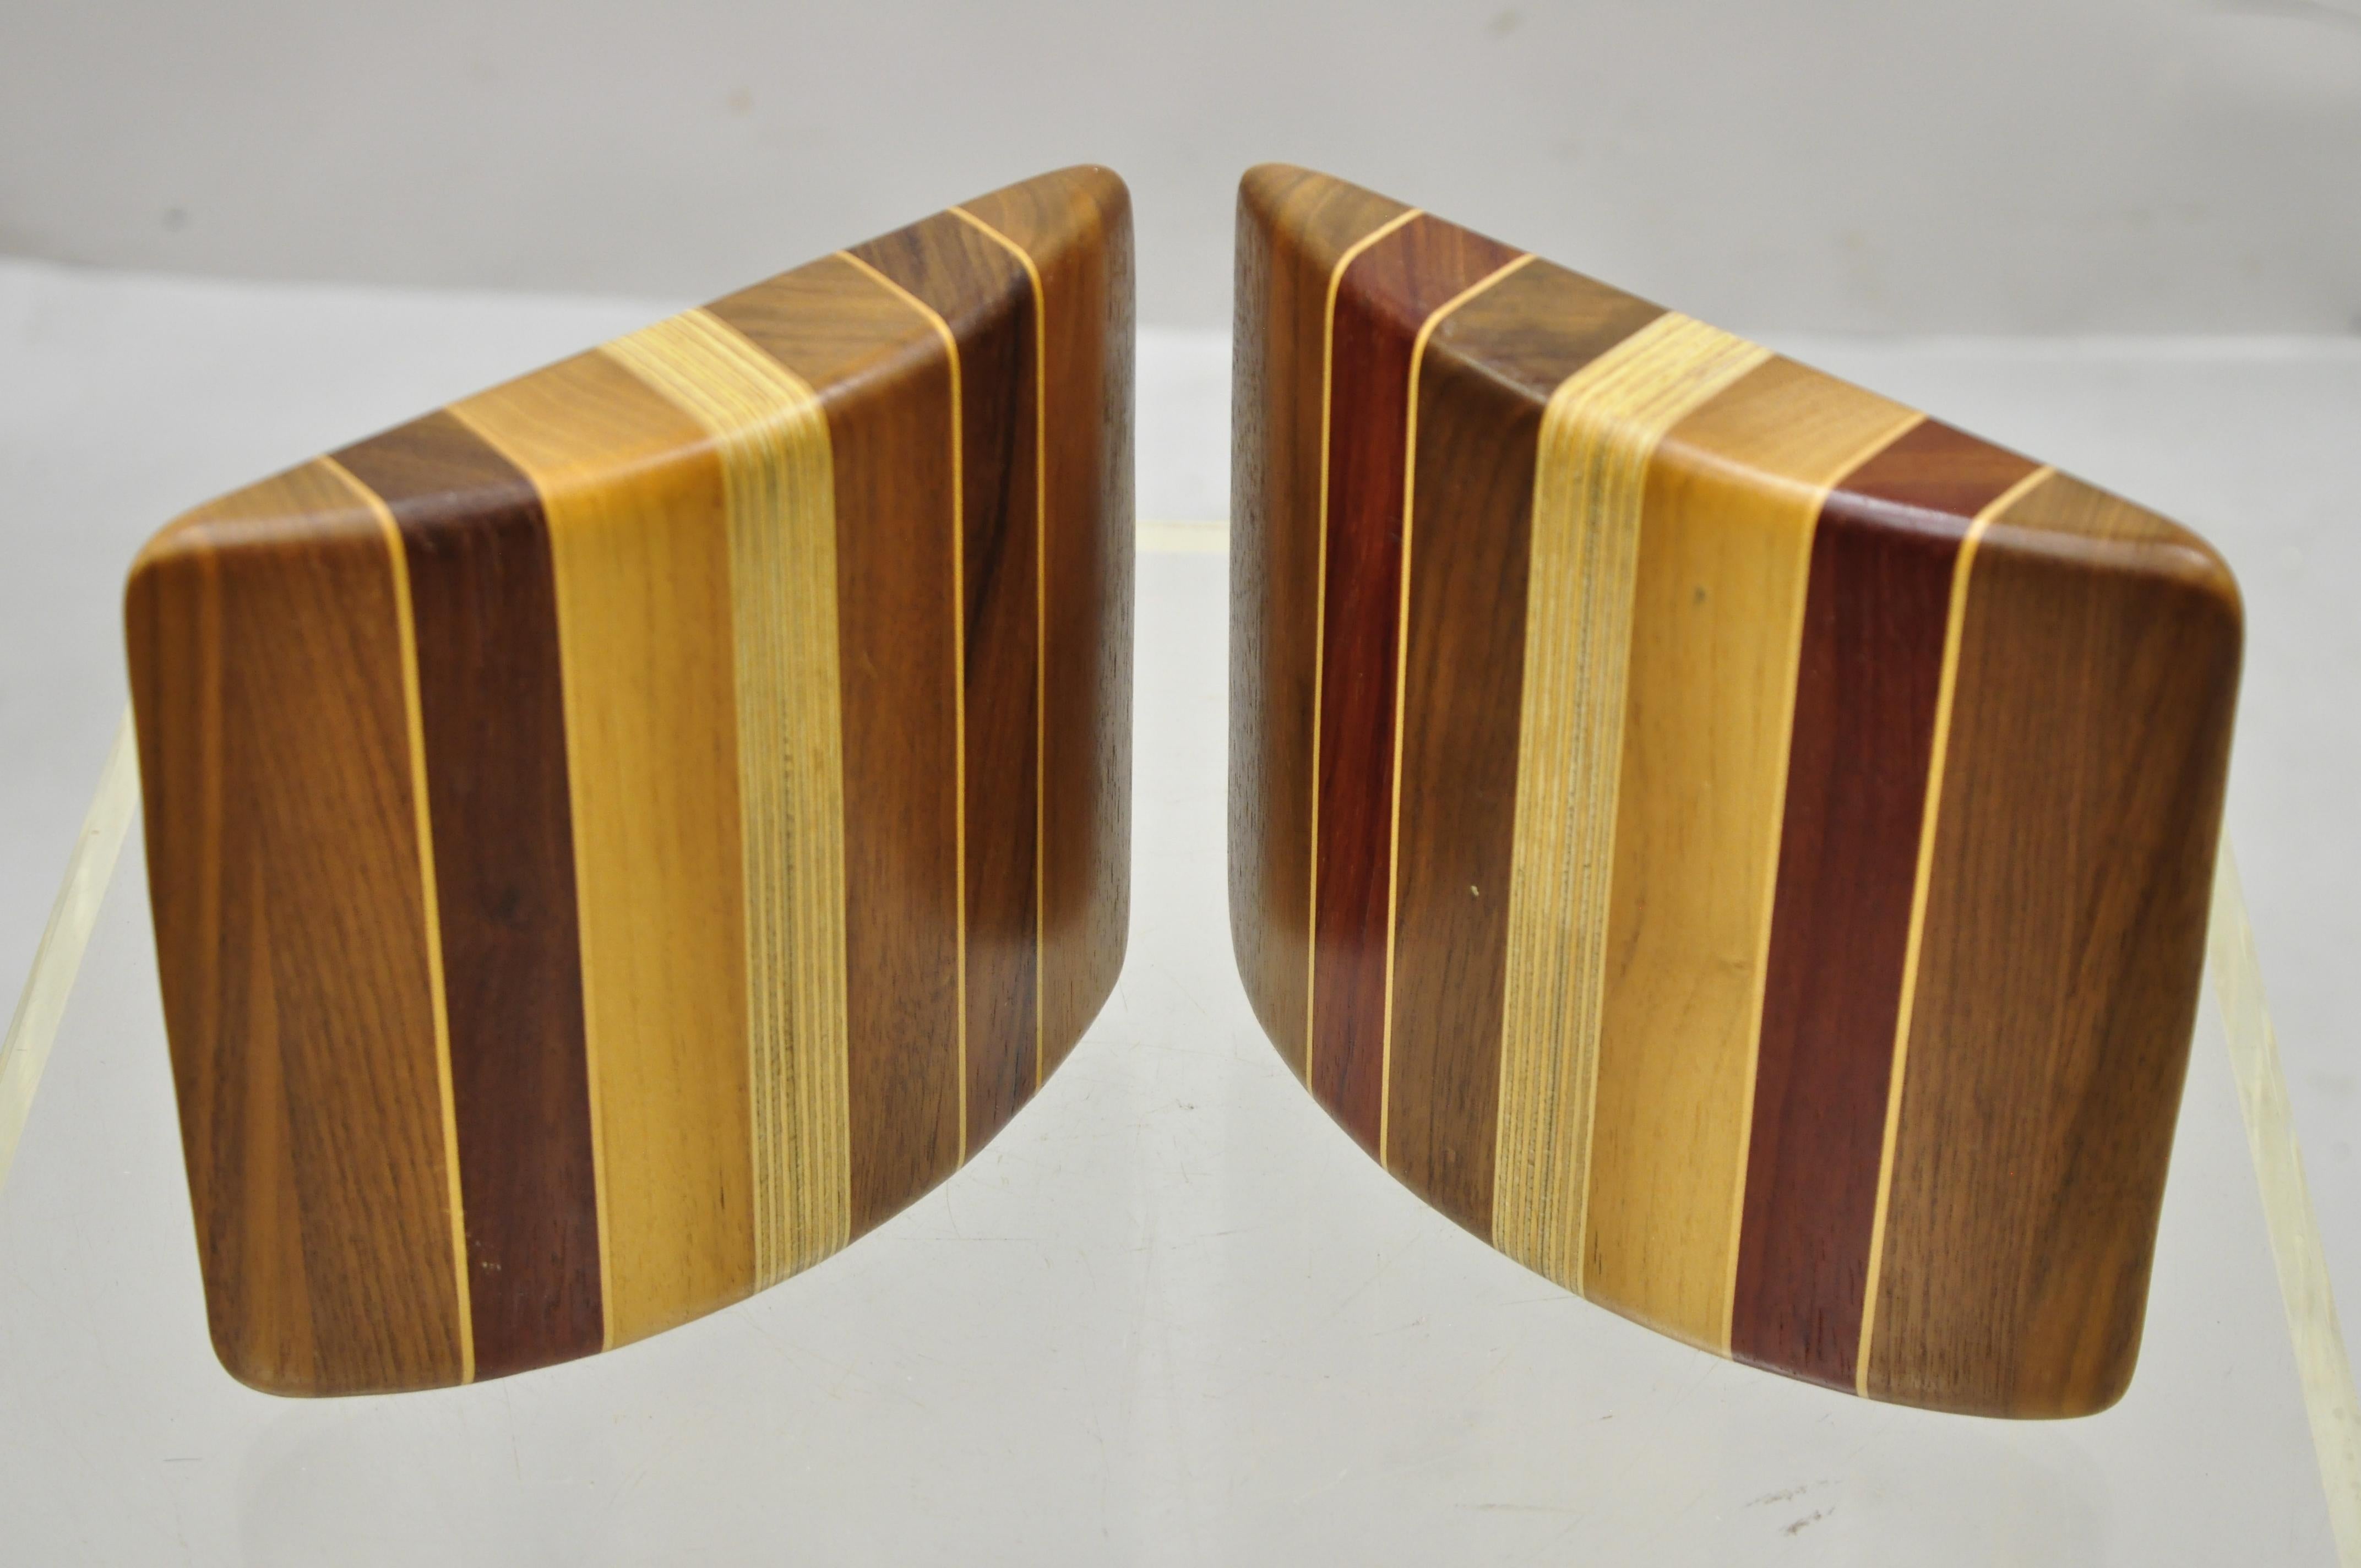 Vintage Mid-Century Modern solid wood with inlay curved bookends - a Pair. Item features solid wood construction, beautiful wood grain, nice inlay, clean modernist lines, quality craftsmanship, great style and form. Circa Mid 20th Century.